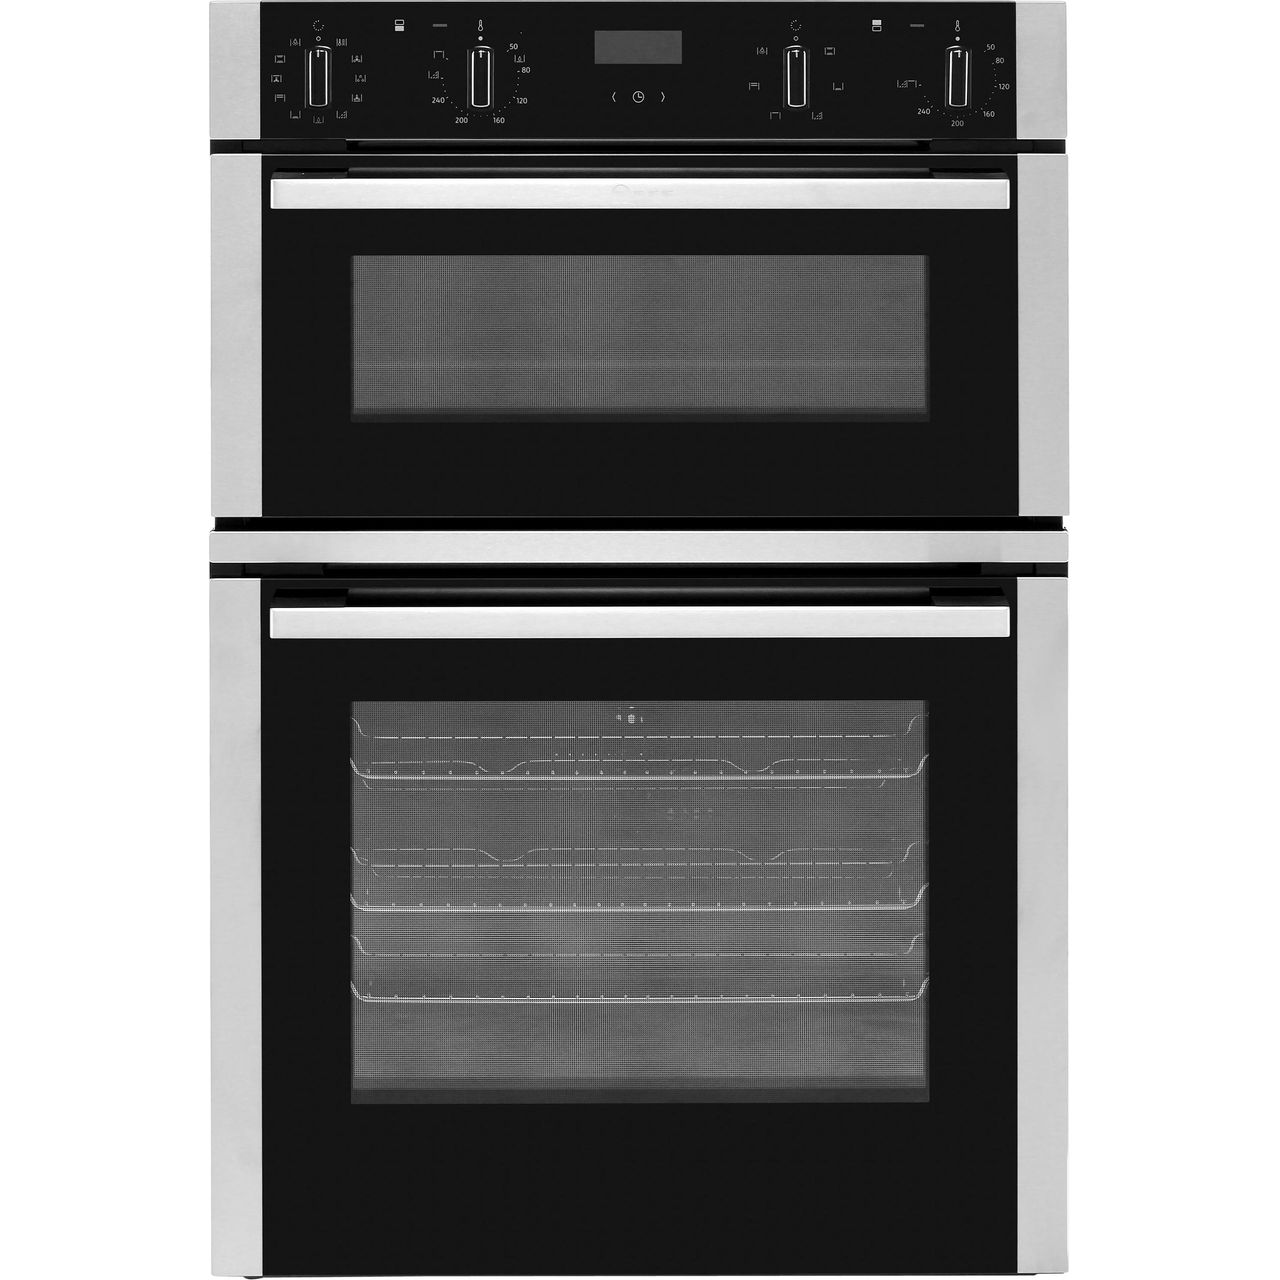 NEFF N50 U1ACE5HN0B Built In Electric Double Oven - Stainless Steel - A/B Rated, Stainless Steel